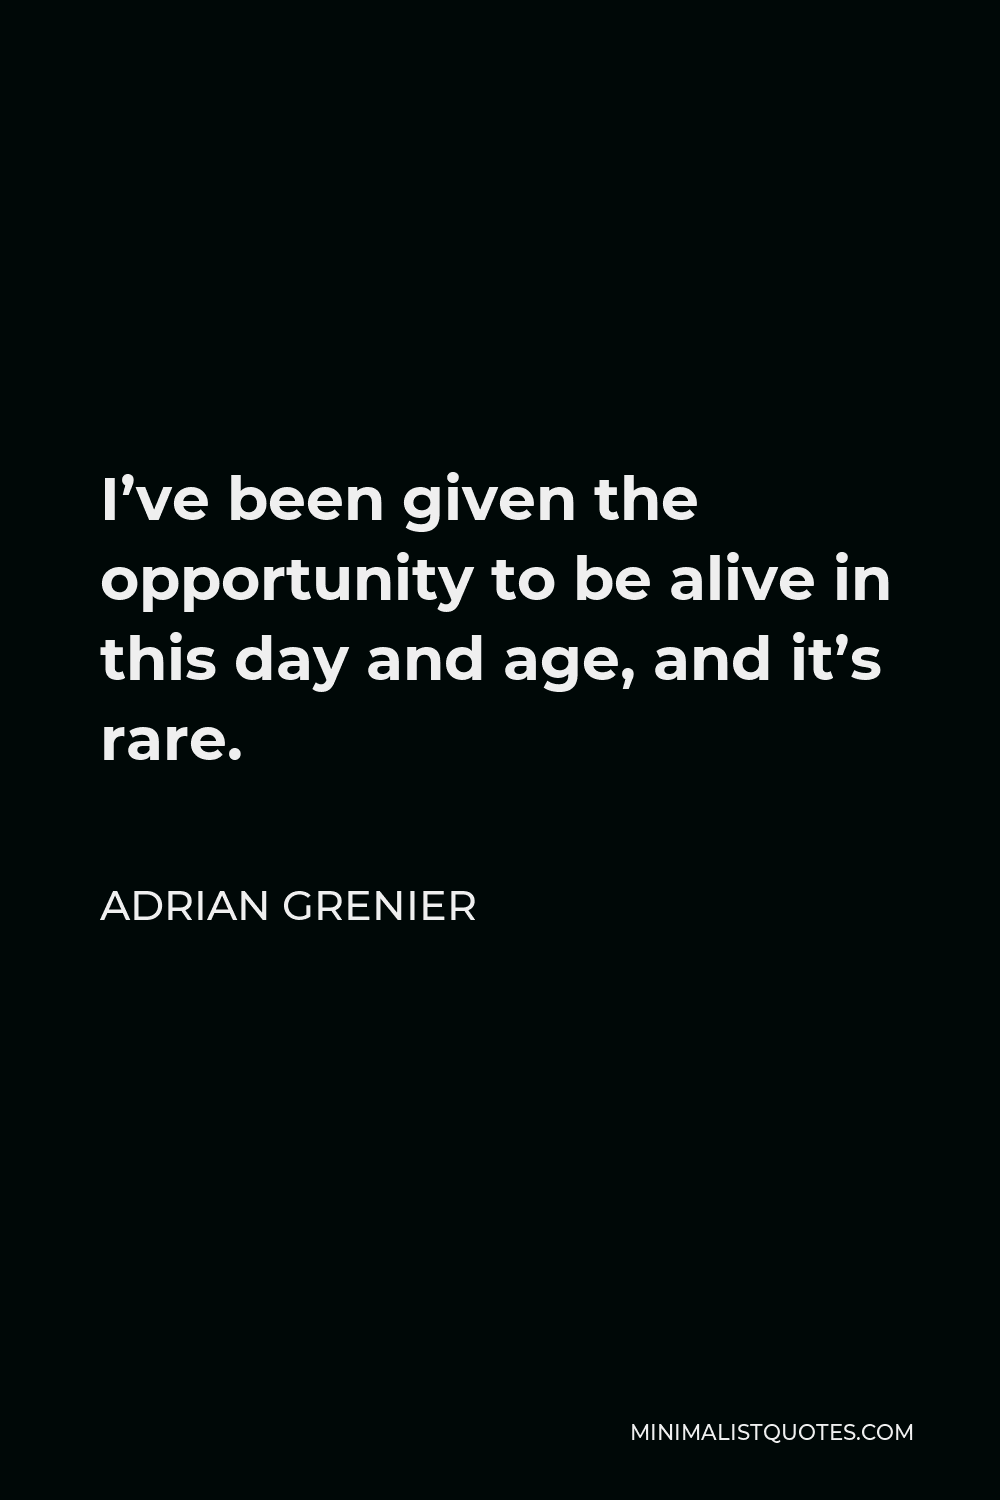 Adrian Grenier Quote - I’ve been given the opportunity to be alive in this day and age, and it’s rare.